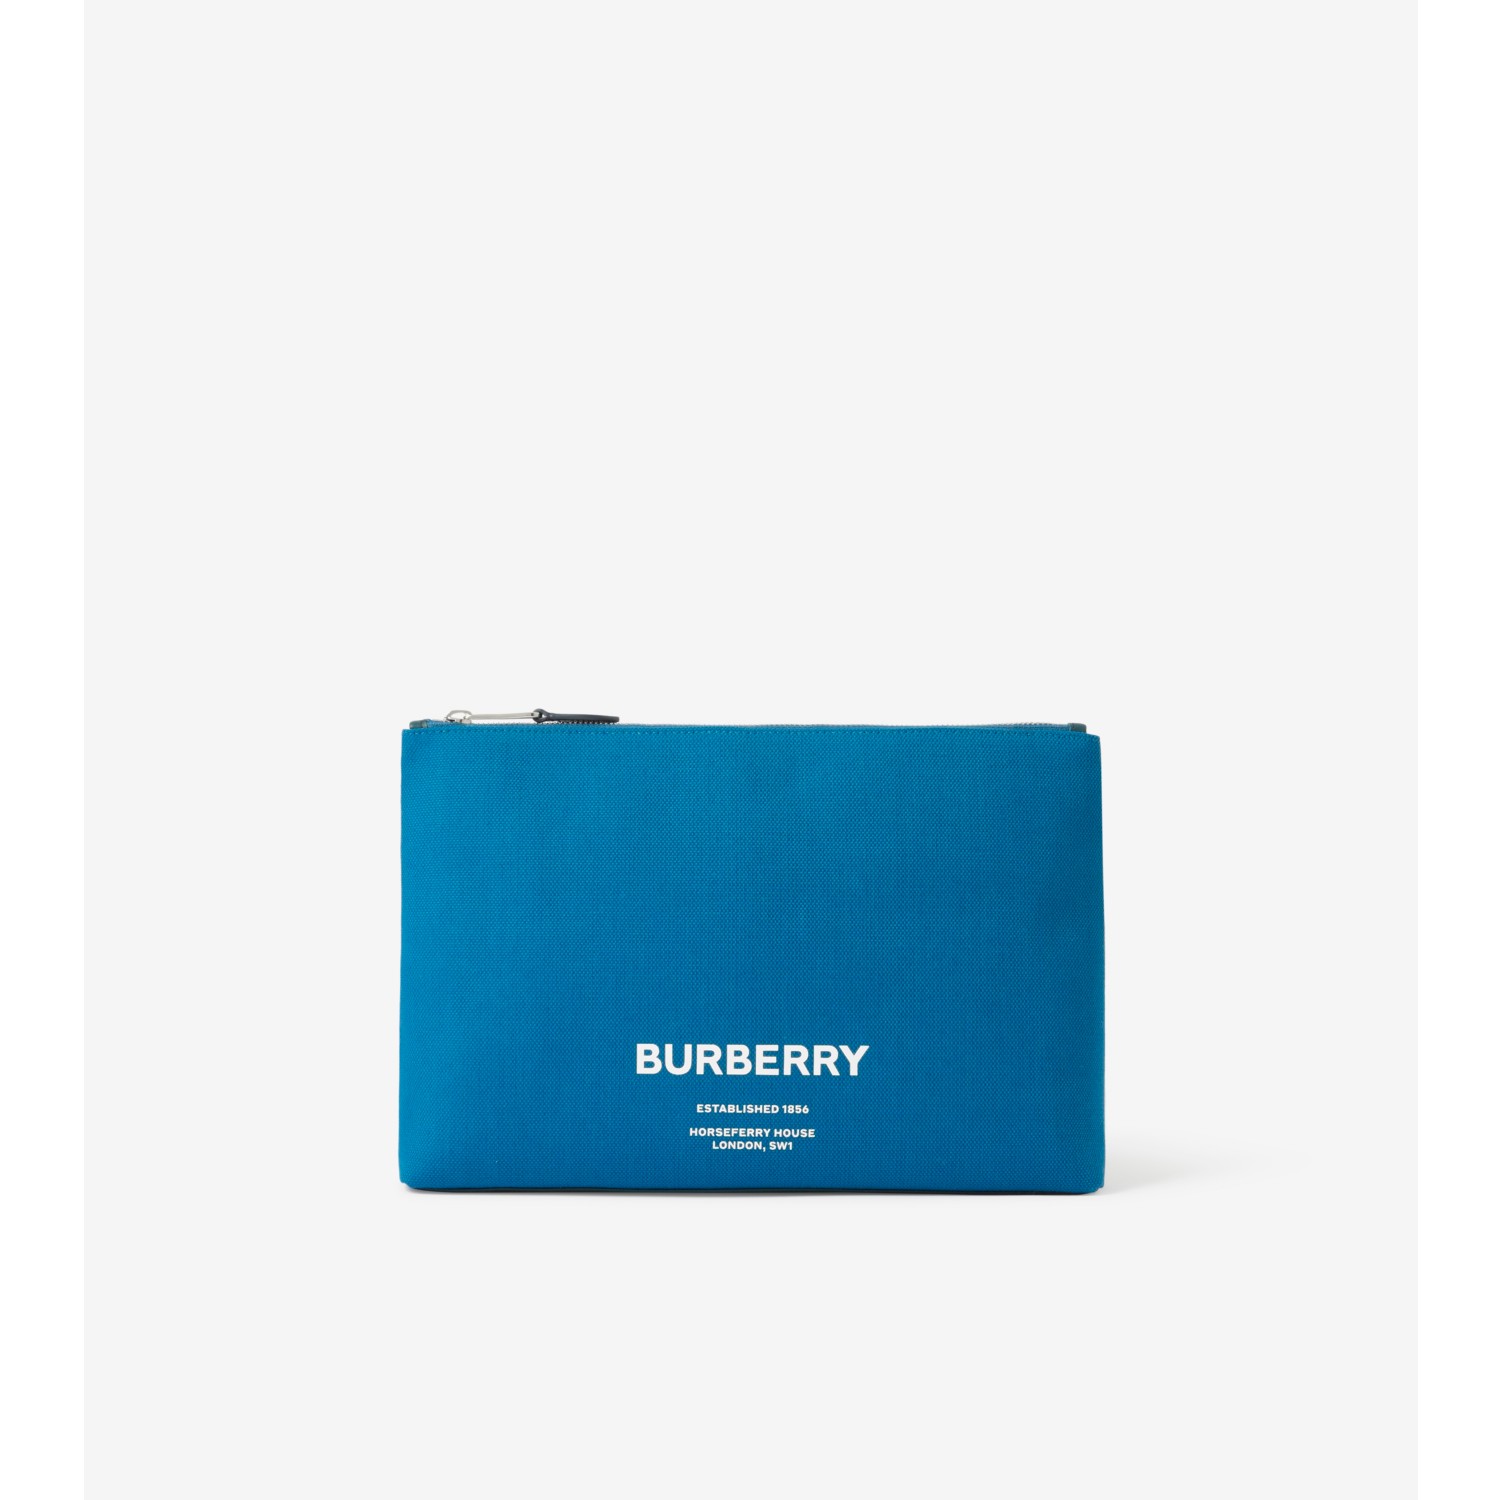 Burberry Leather Card Holder Hot Sale, SAVE 55% 